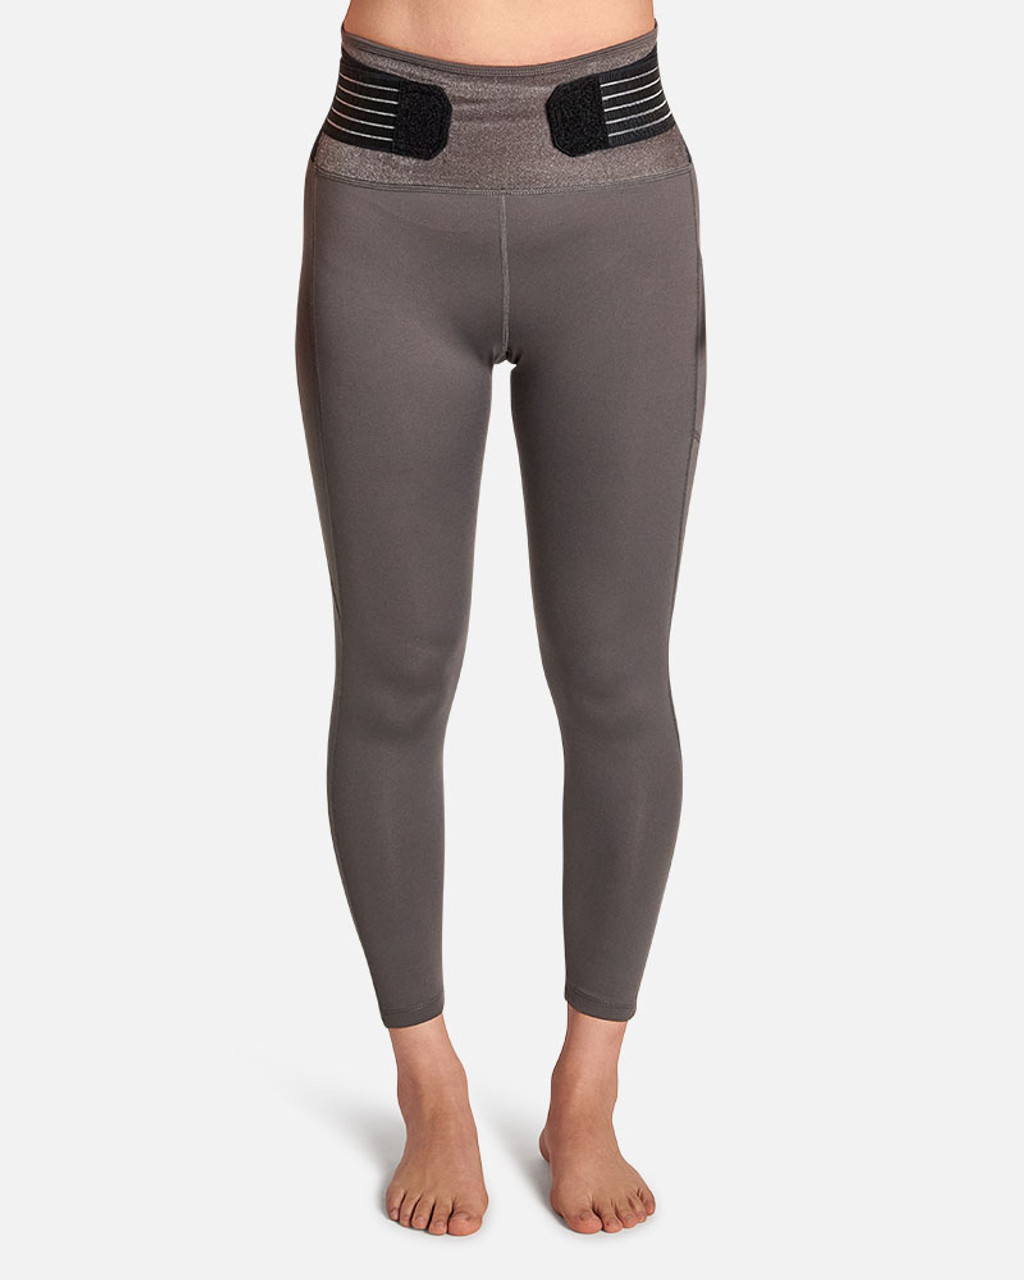 Skinny fit: leggings with foot straps - navy